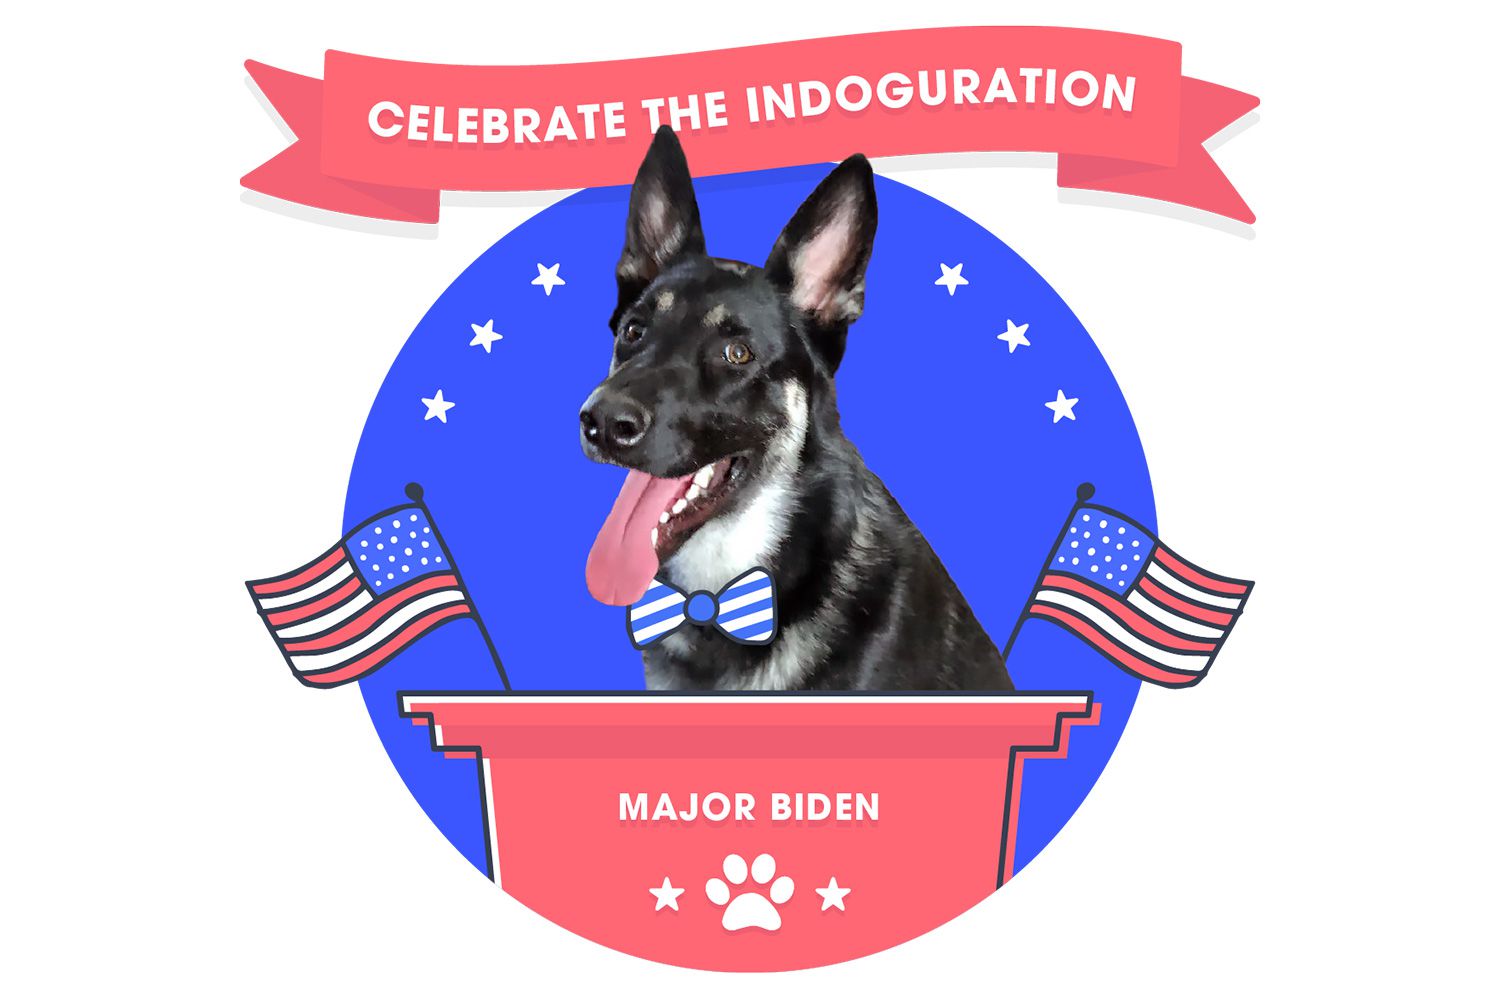 Major Biden's 'Indoguration' Raises $200K for Delaware Rescue that Adopted  Out Pup to Joe Biden | PEOPLE.com